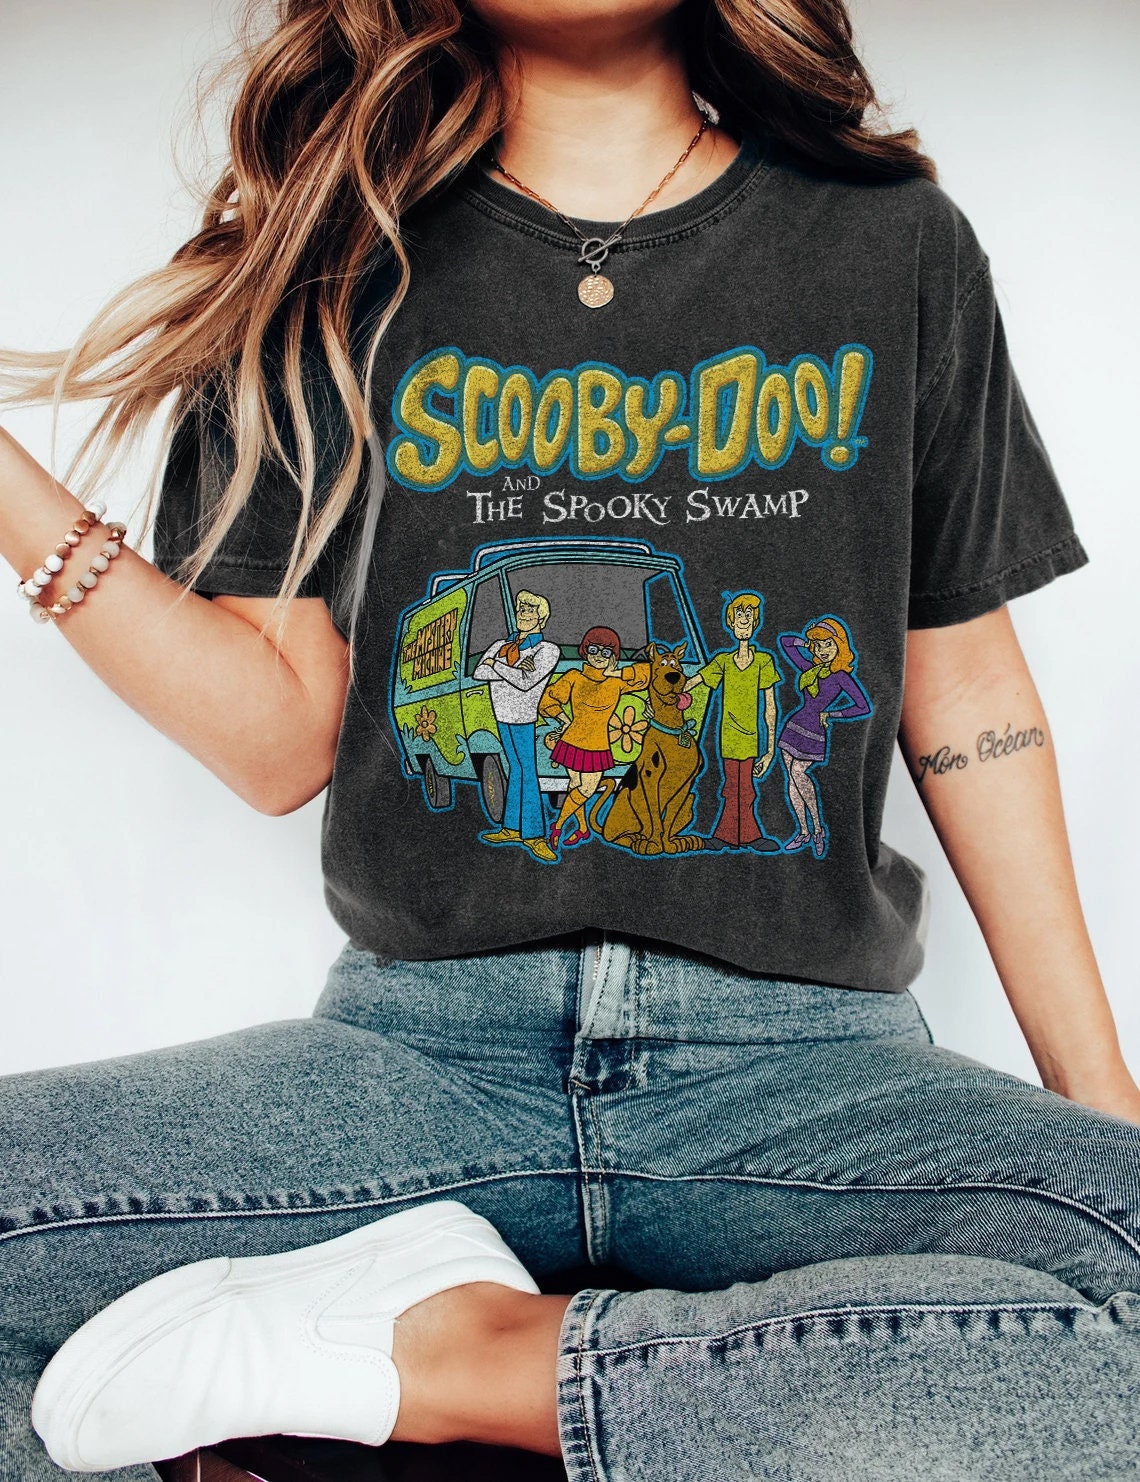 Discover Scooby Doo The Spooky Swamp T-Shirt